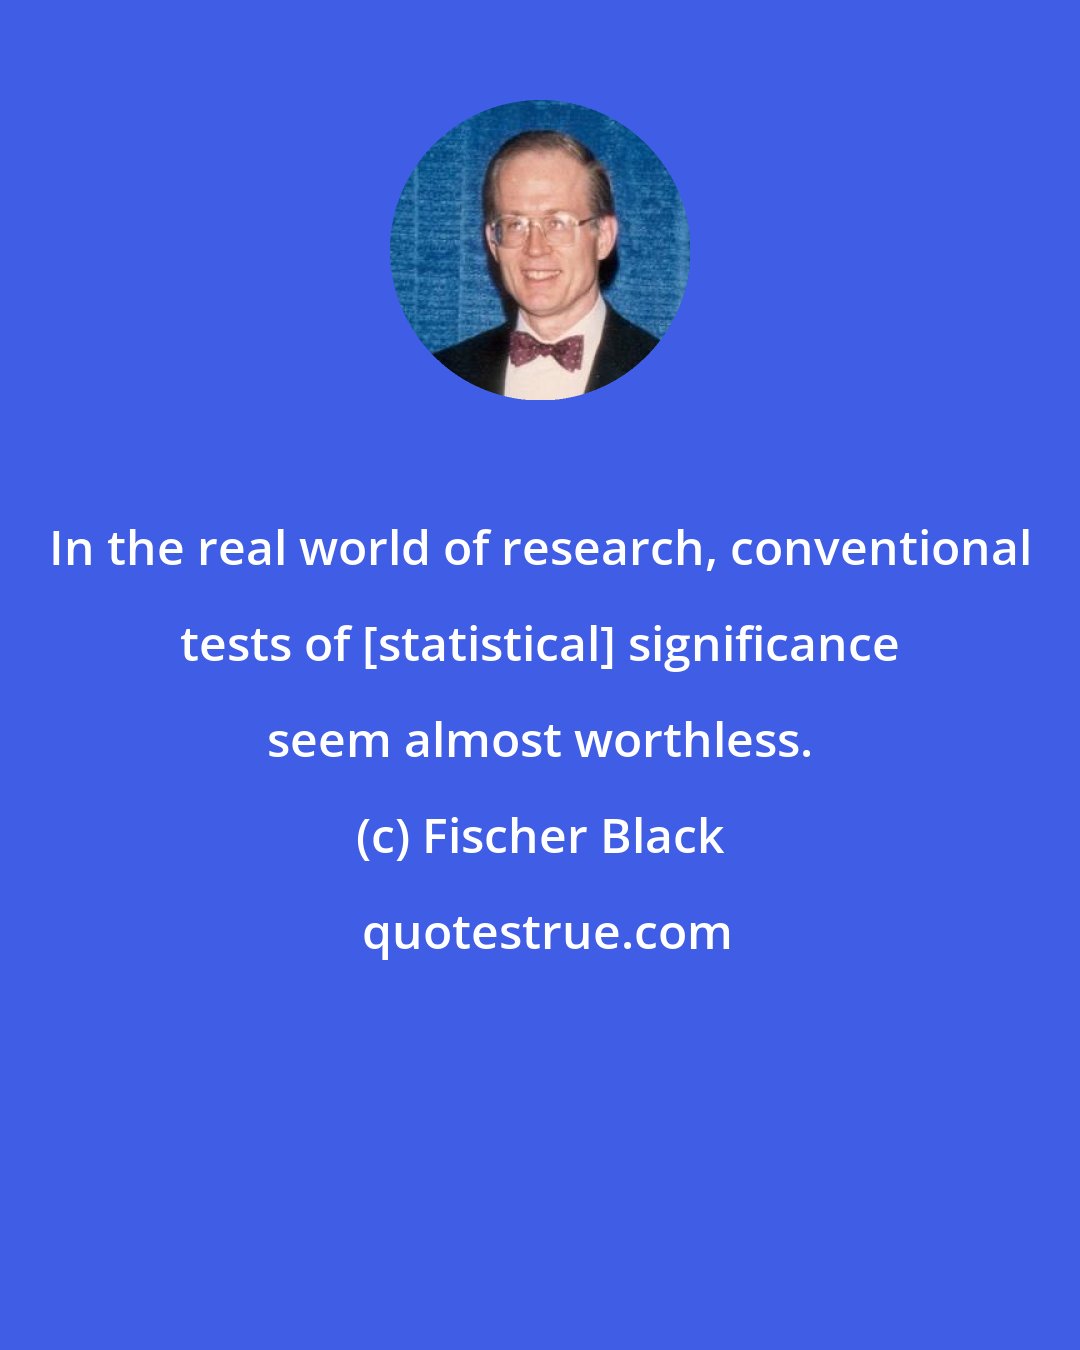 Fischer Black: In the real world of research, conventional tests of [statistical] significance seem almost worthless.